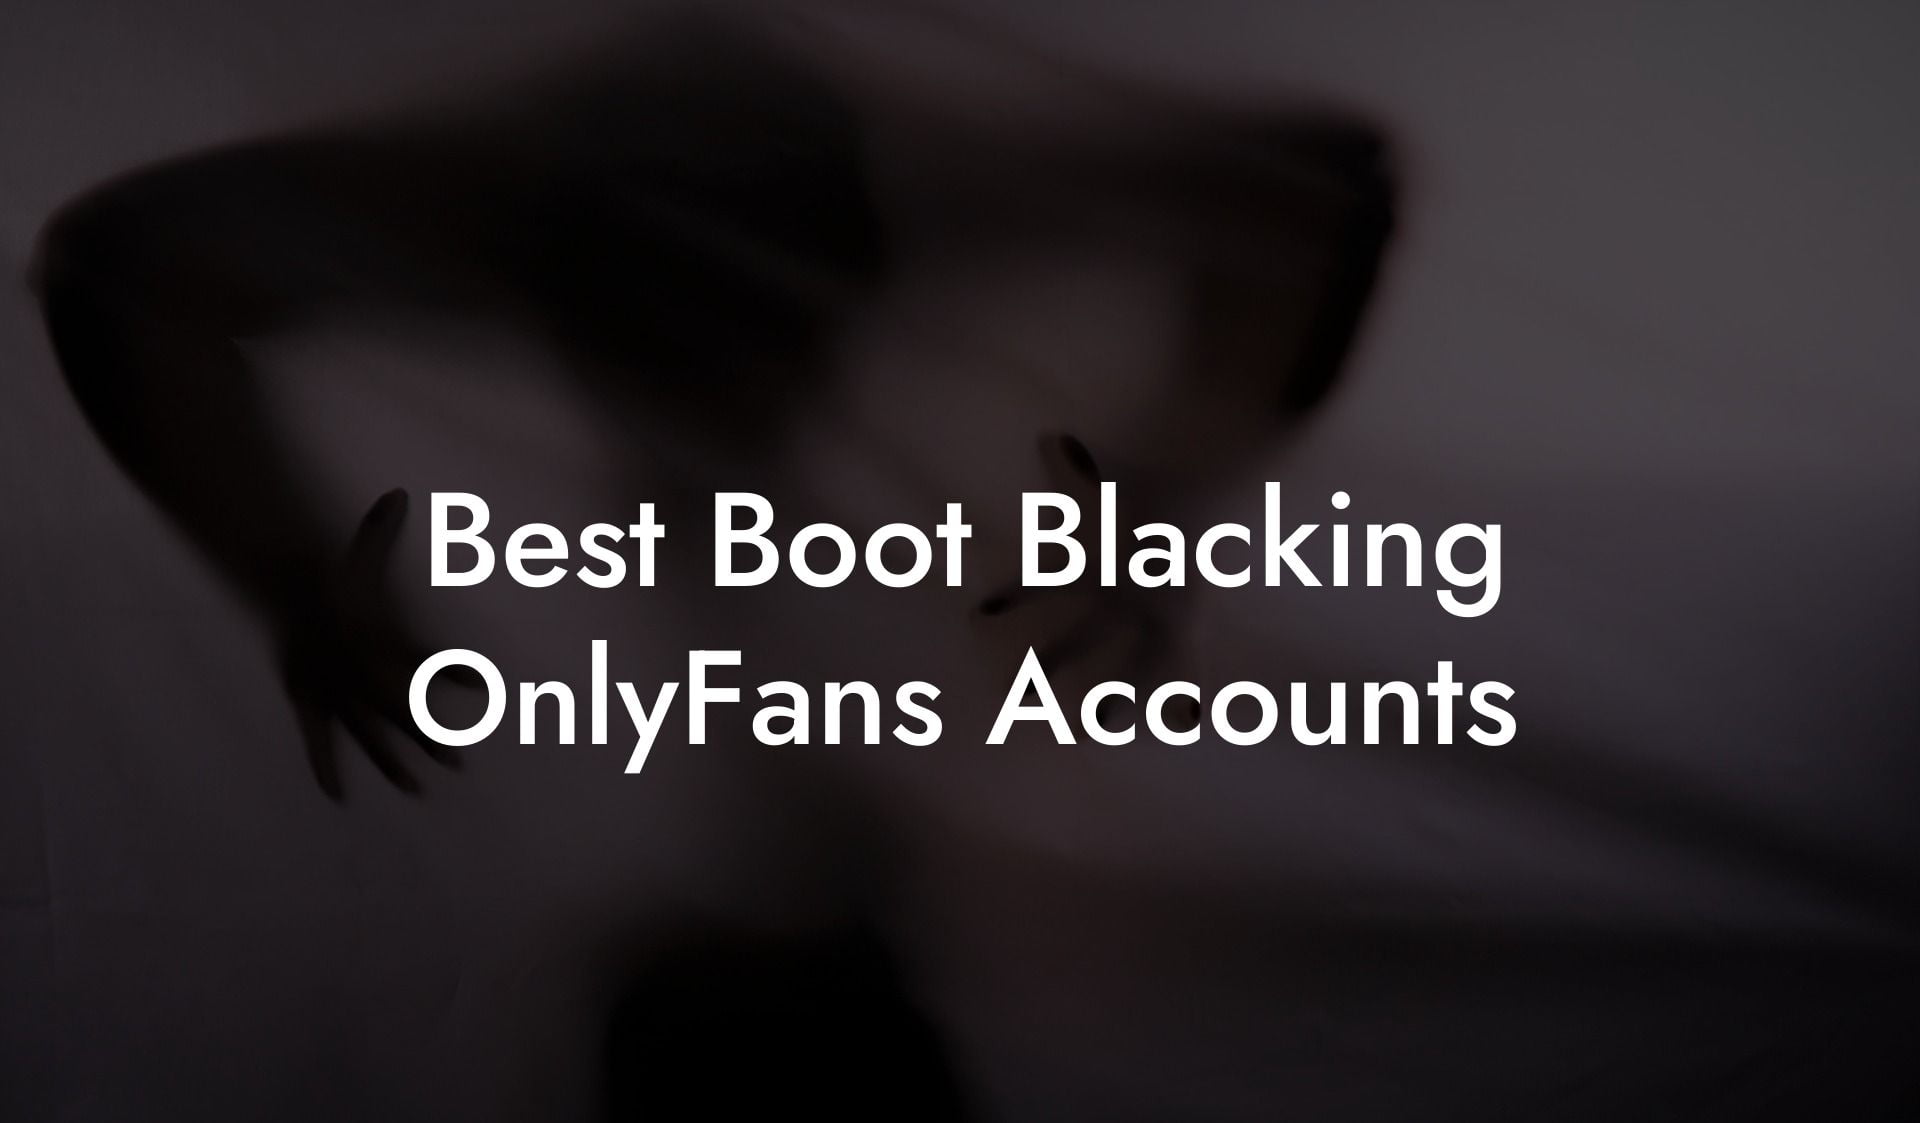 Best Boot Blacking OnlyFans Accounts